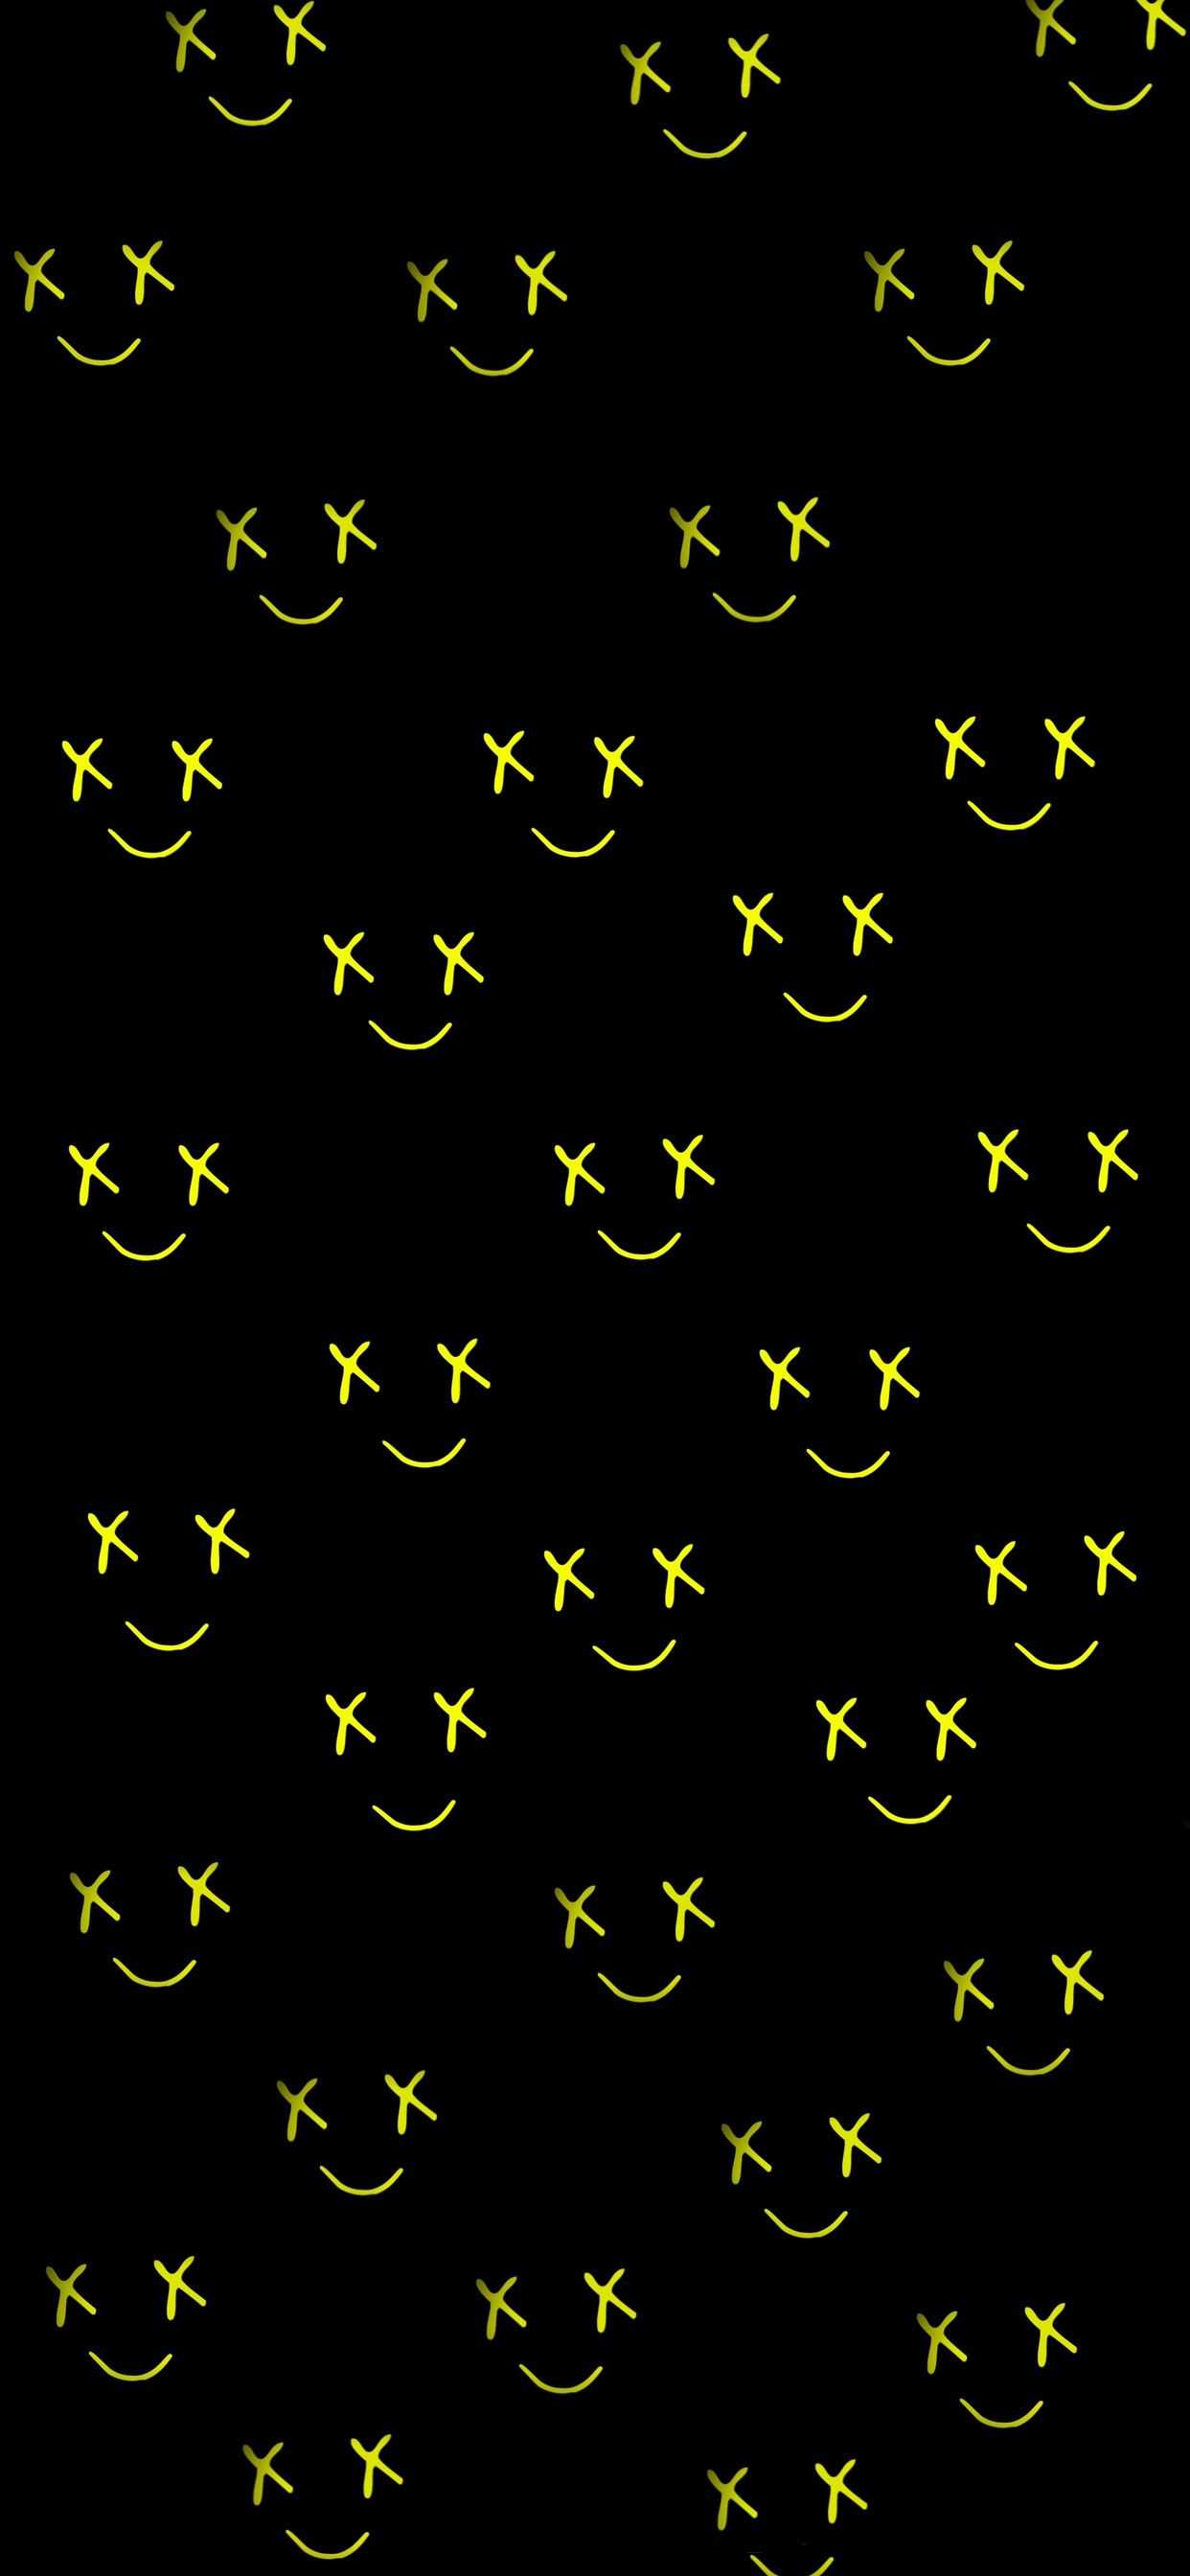 Smiley Face IPhone Wallpaper